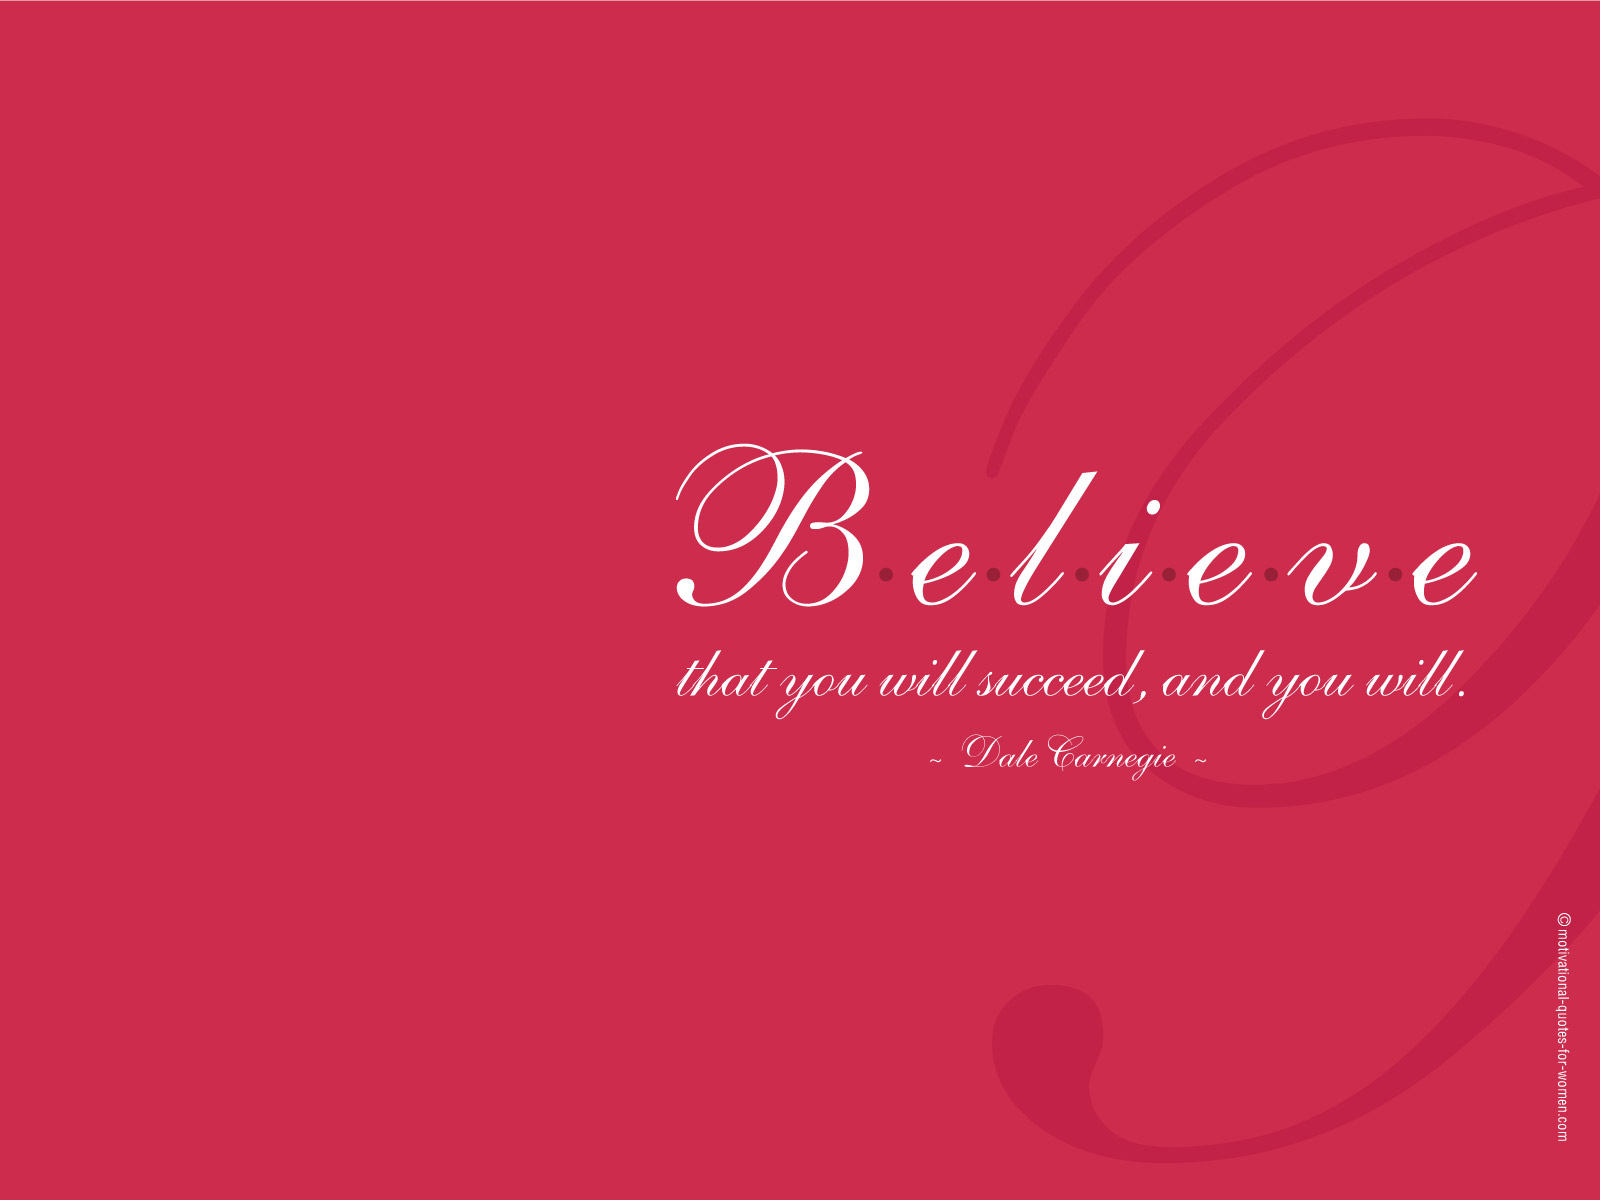 Inspirational Believe Quotes Wallpaper Bwalles Gallery